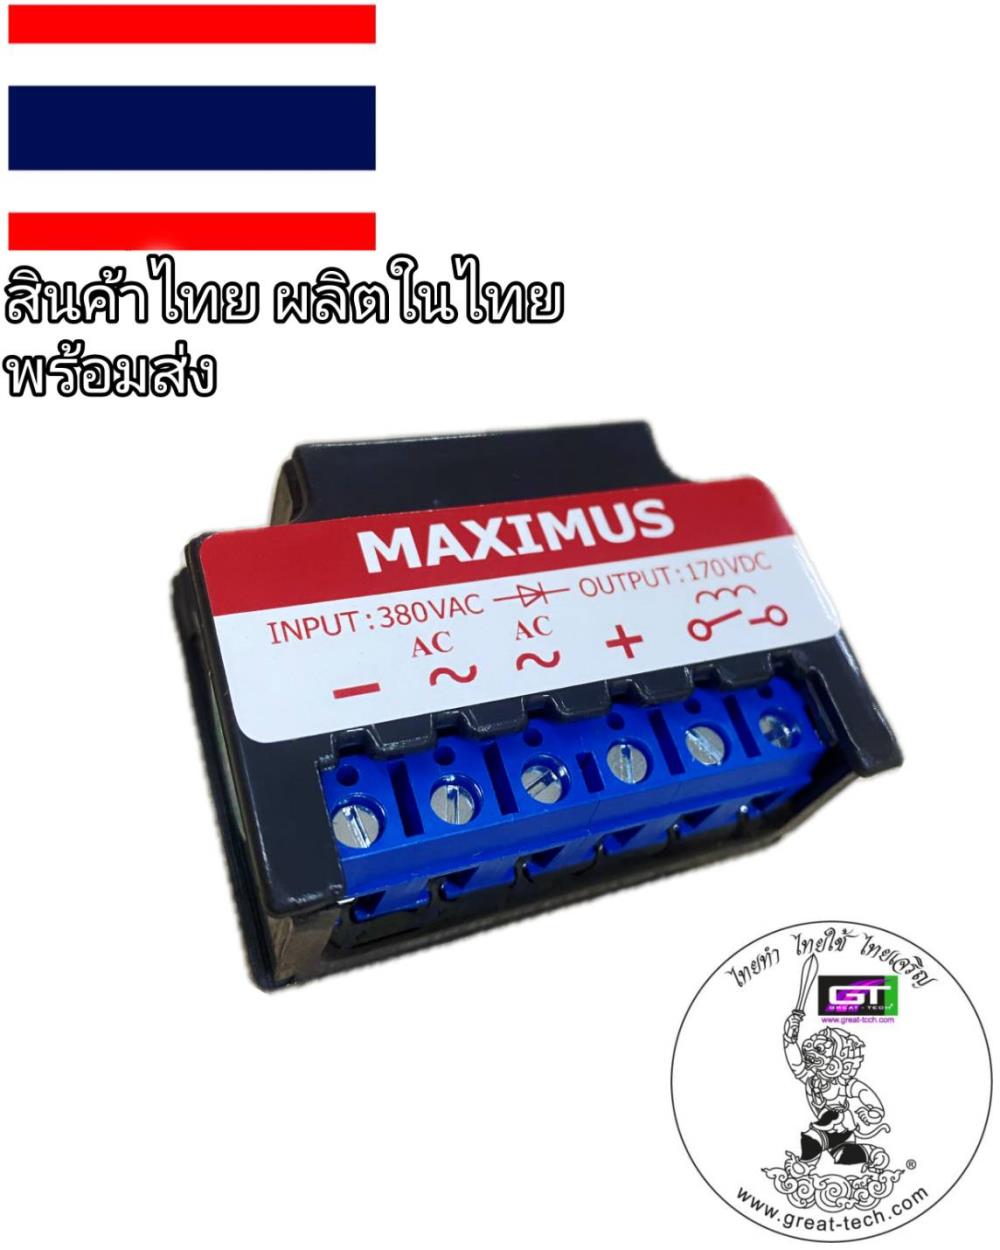 MAXMUS ,#เบรคเรคติไฟเออร์#รับซ่อมคอยล์เบรกไฟฟ้า&จำหน่ายเบรกไฟฟ้าและRectifier #BRAKE RECTIFIER#OVER LOAD RELAY,,Electrical and Power Generation/Electrical Components/Rectifiers